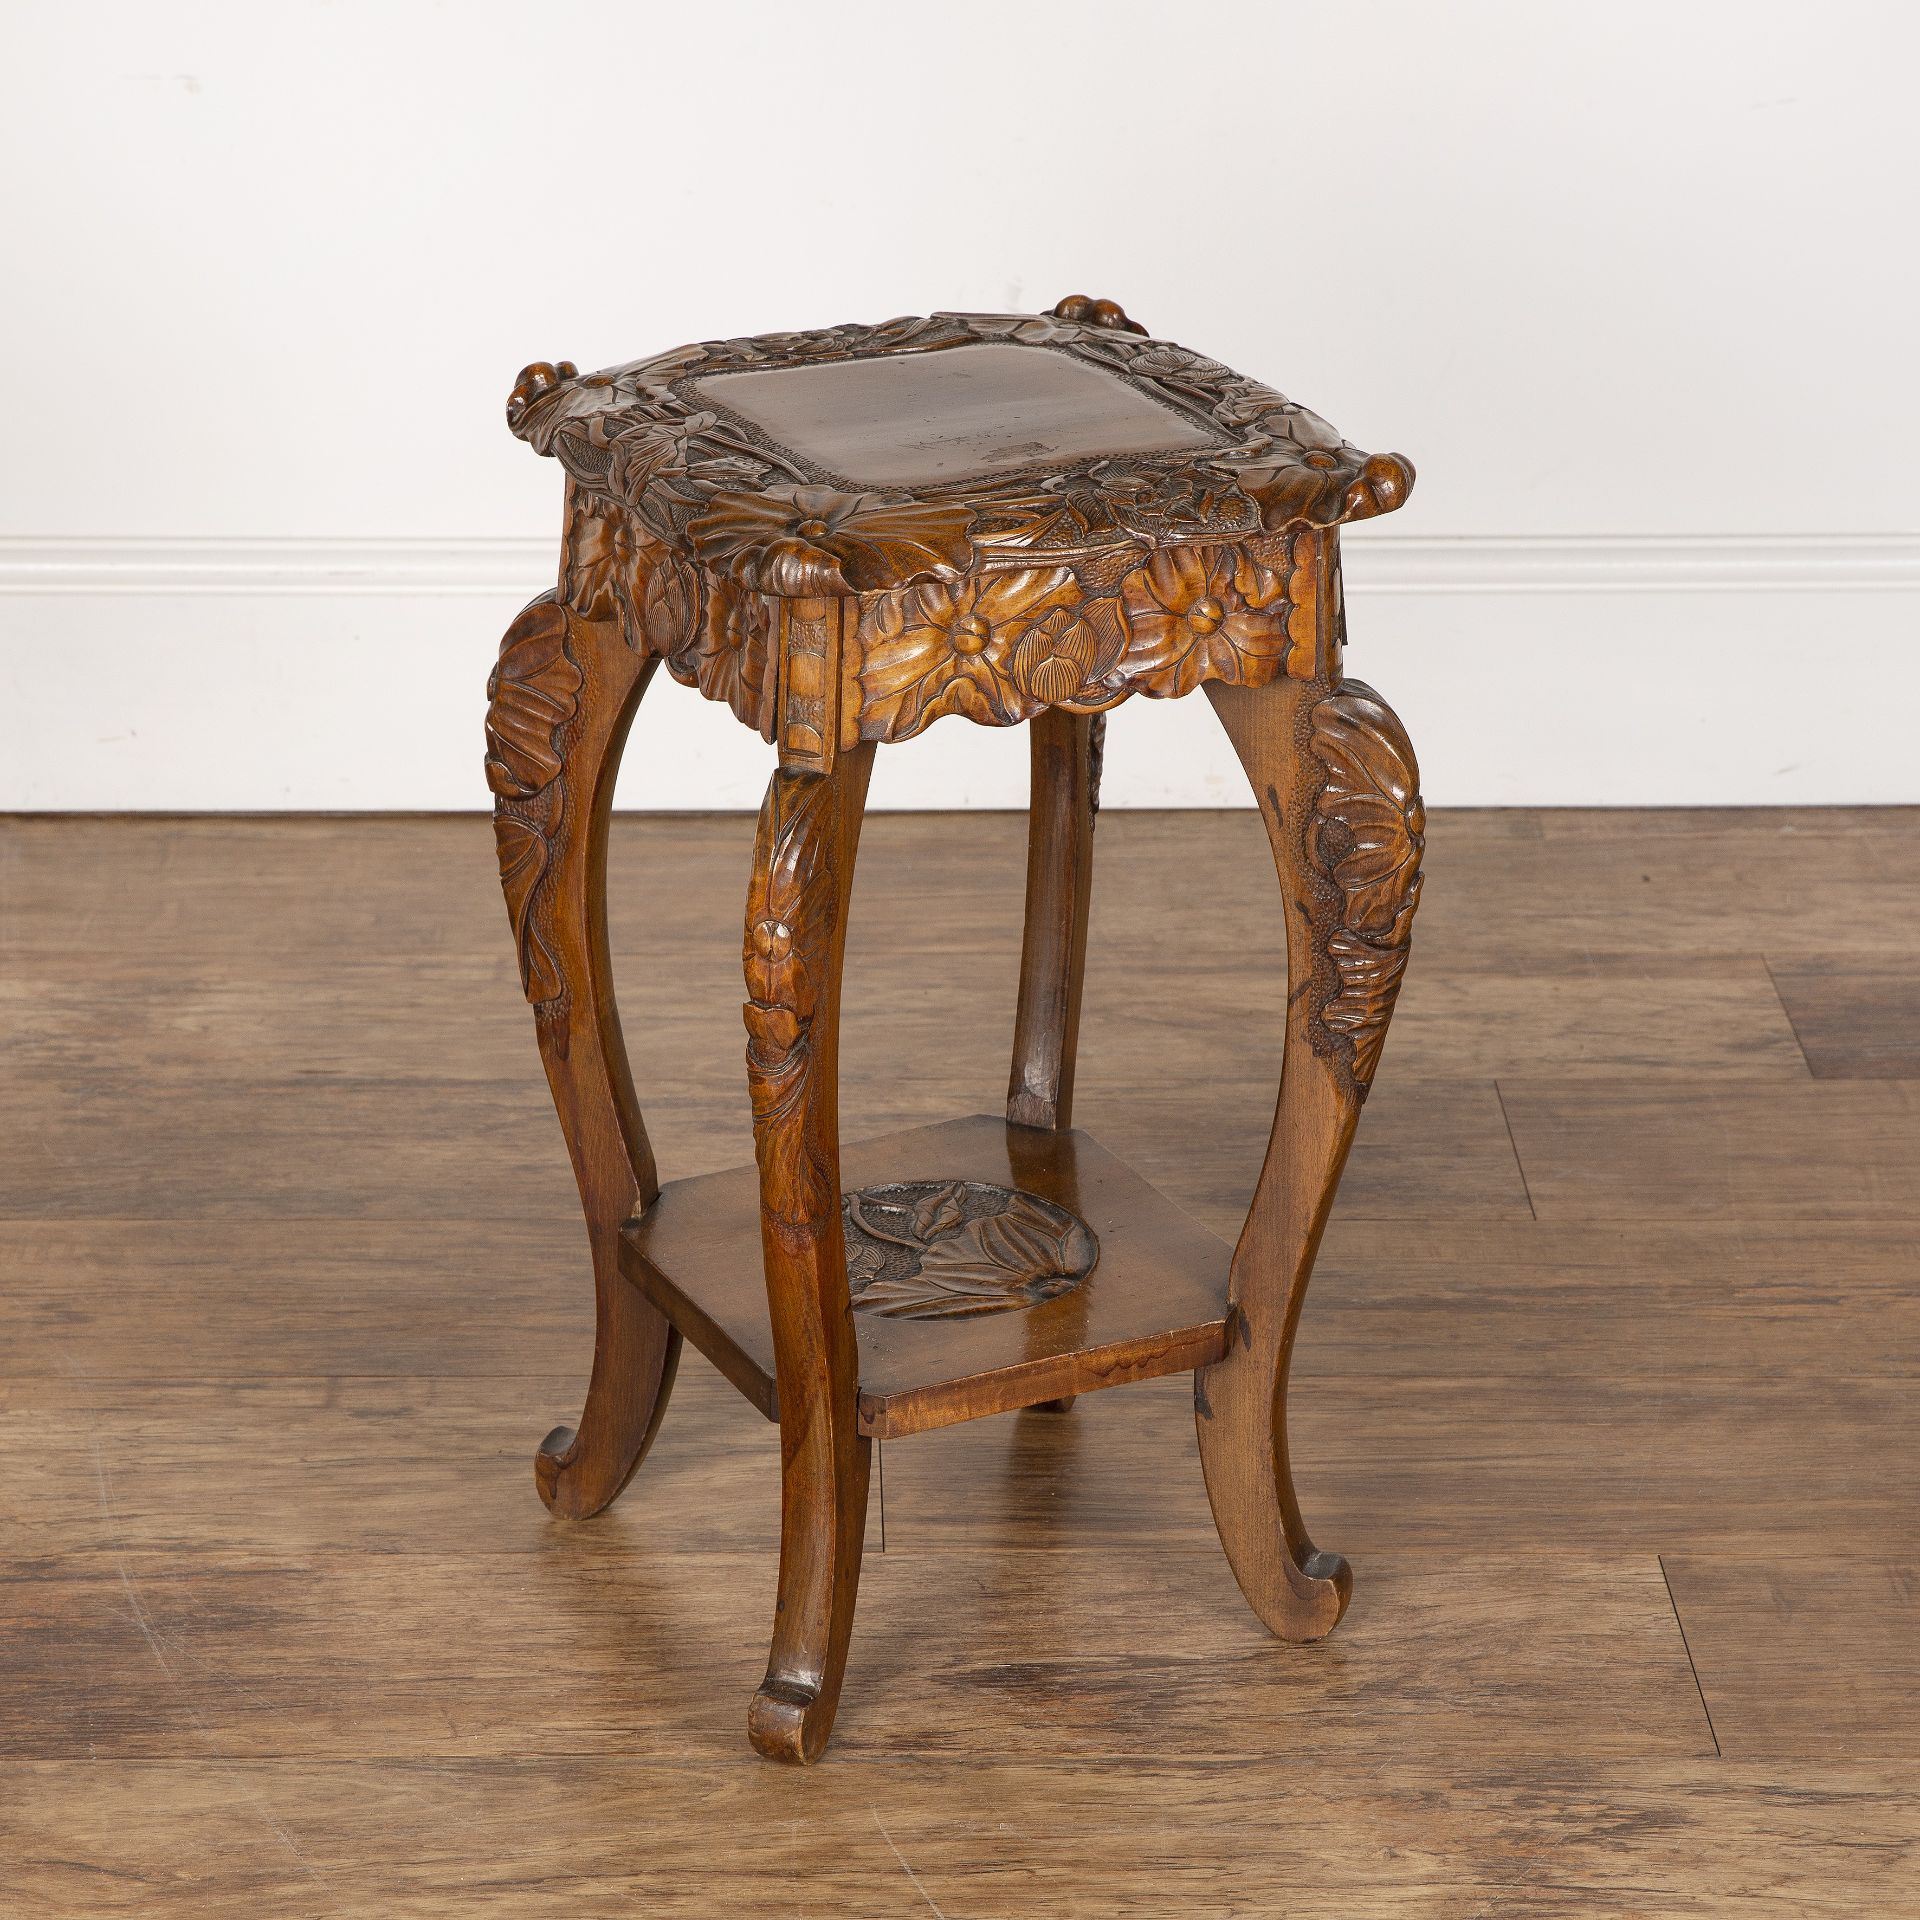 Liberty & Co 'Japanese' table, stained wood, numbered '560' to the underside, 56cm high overall x